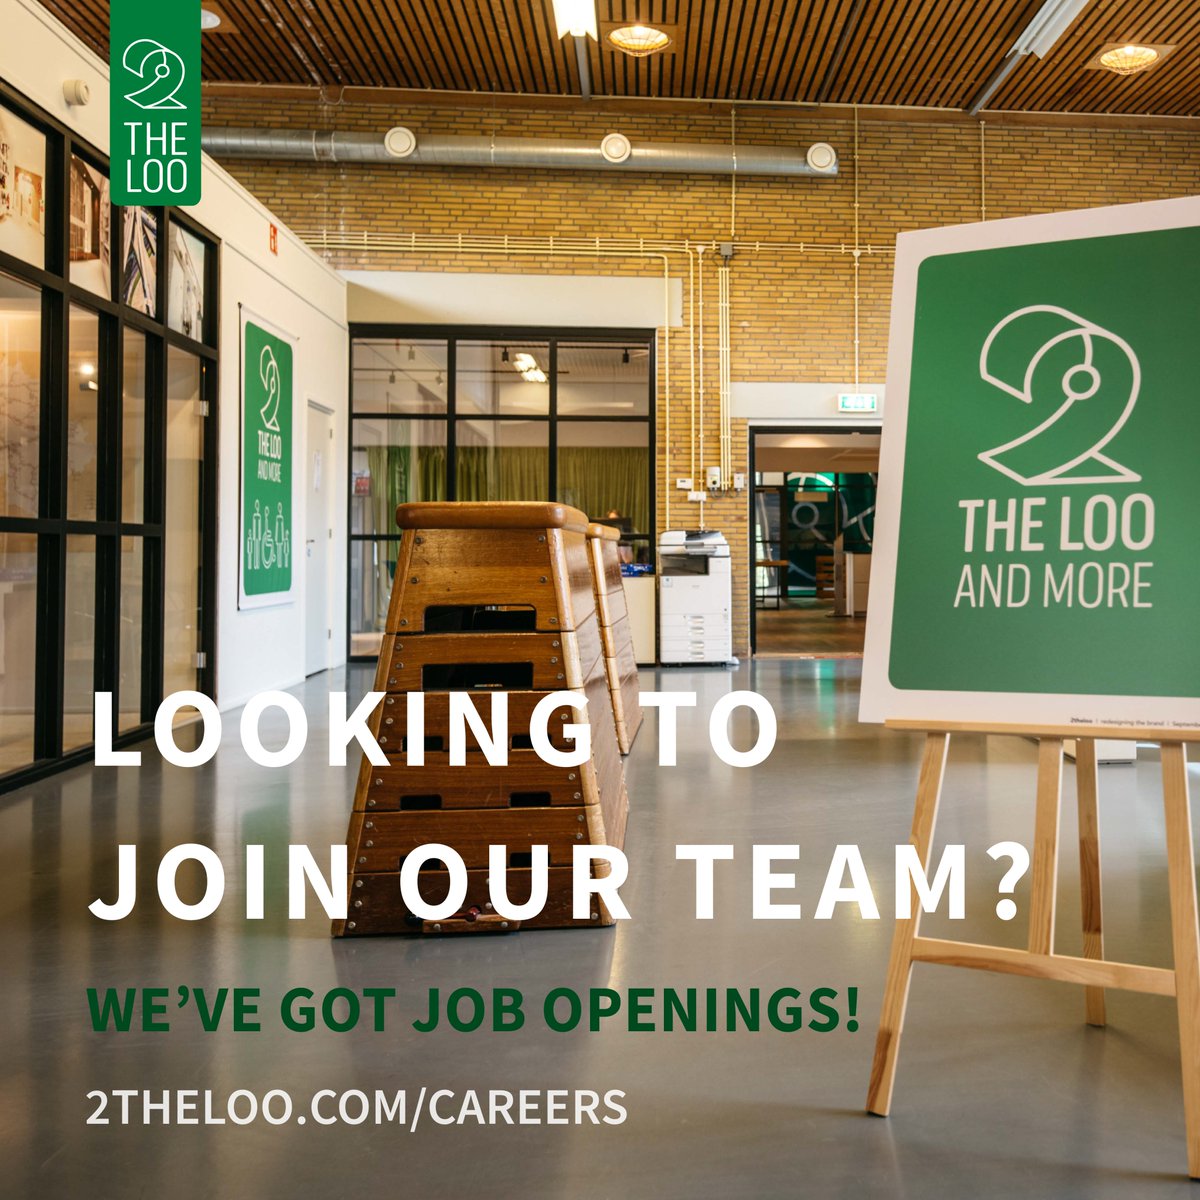 Are you ready to embark on a new career path with an organisation that is redefining the business of public restrooms? Then hop on over to our Career Page 👉 lnkd.in/eEshx-mb Tag & share with your networks! #2theloo #wearehiring #publicrestrooms #careers #newjobs